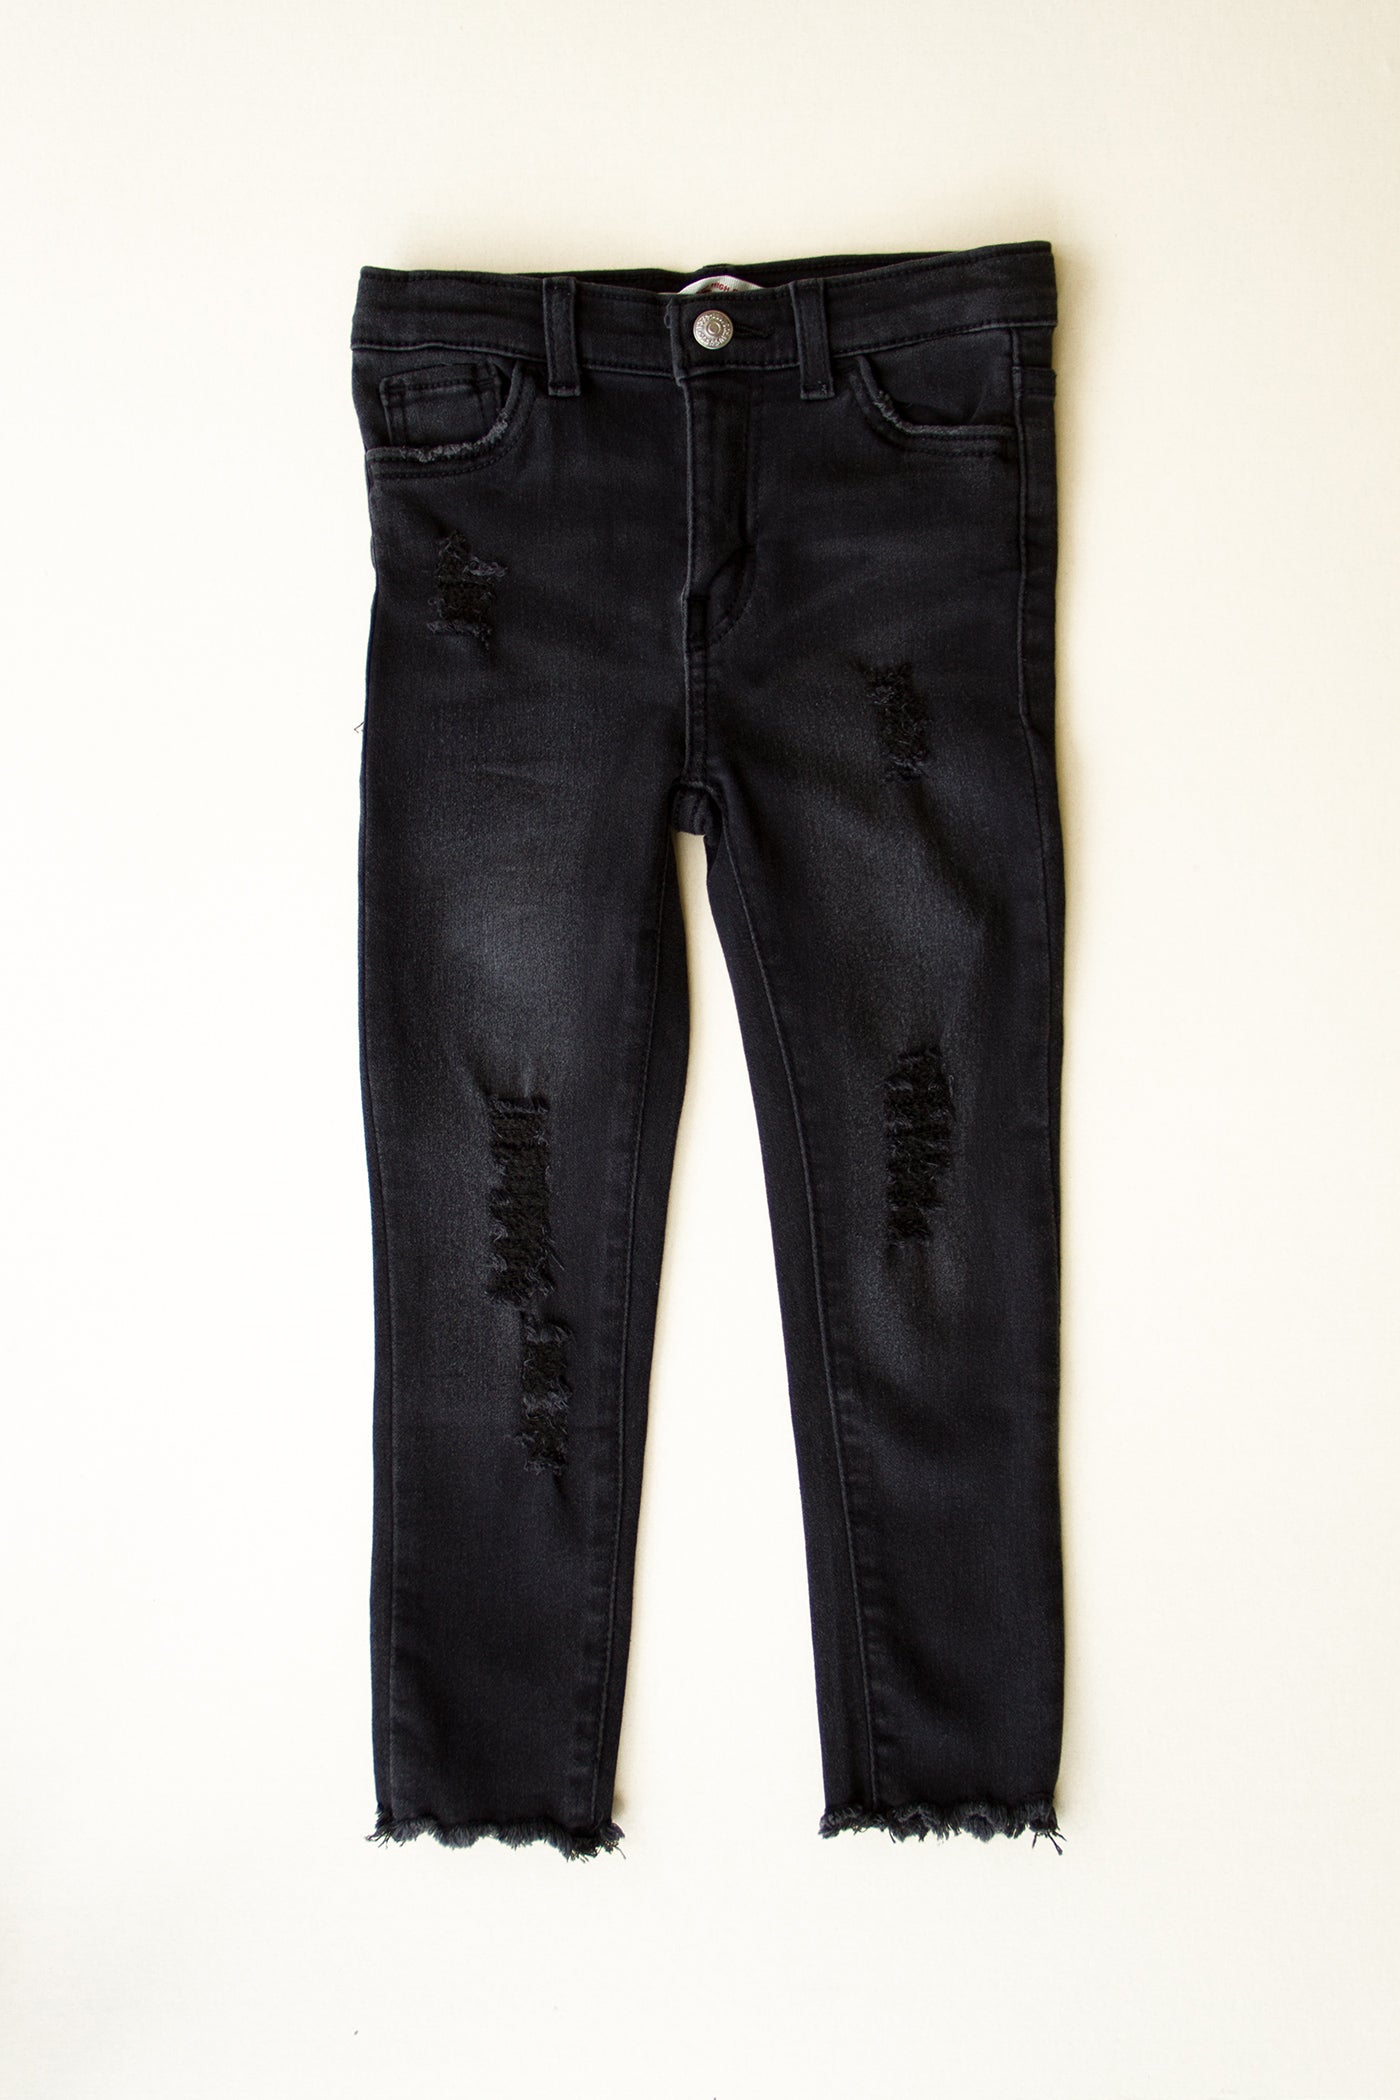 720 High Rise Super Skinny Kids Jeans by Levi's